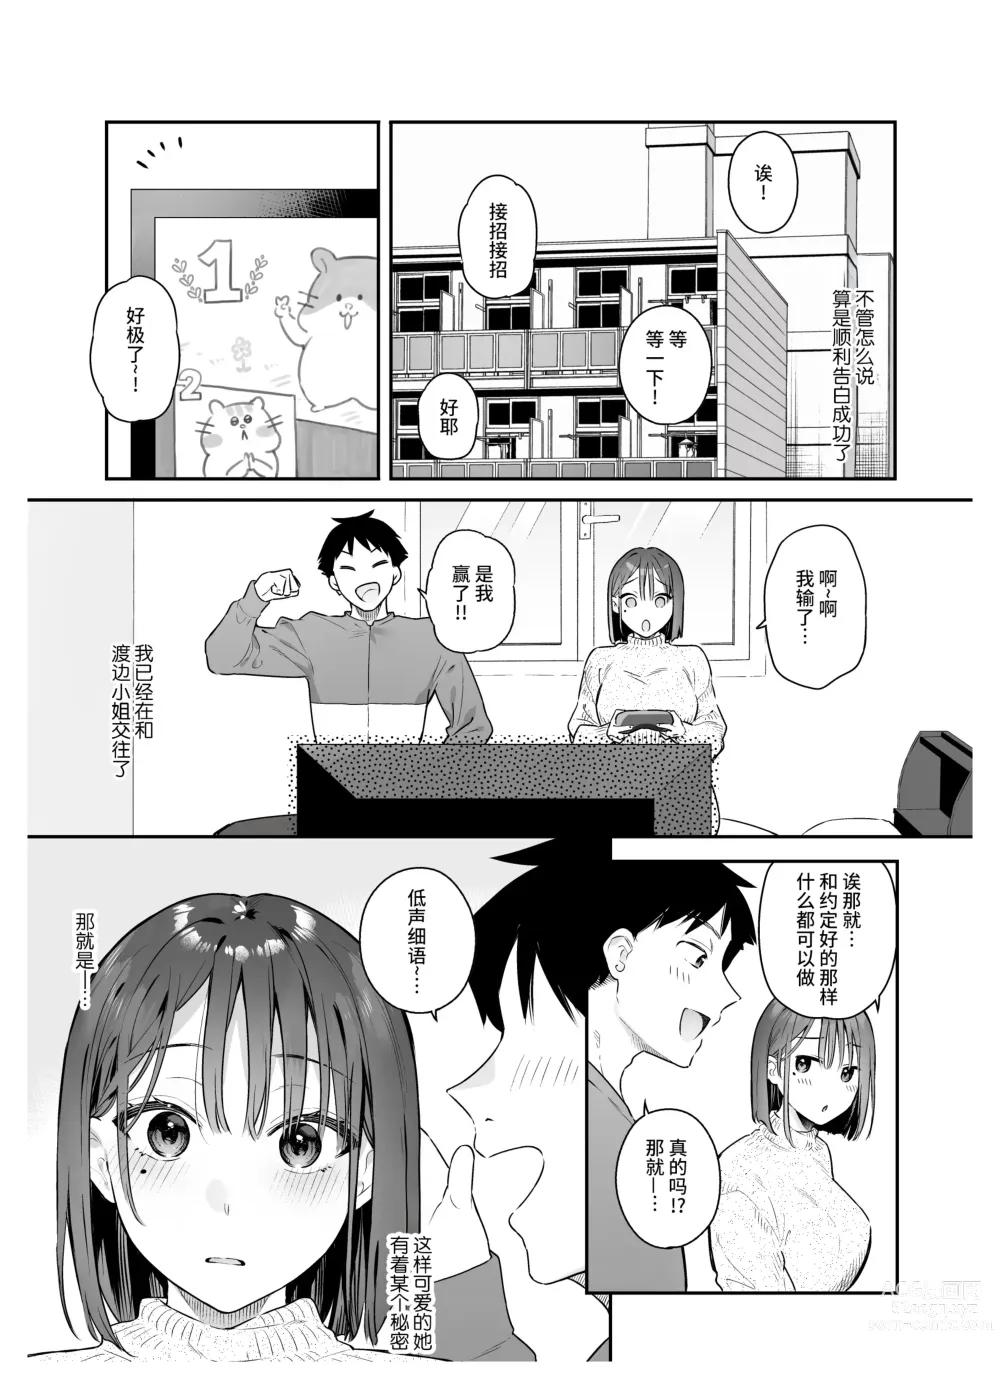 Page 3 of doujinshi 她的发情开关 2